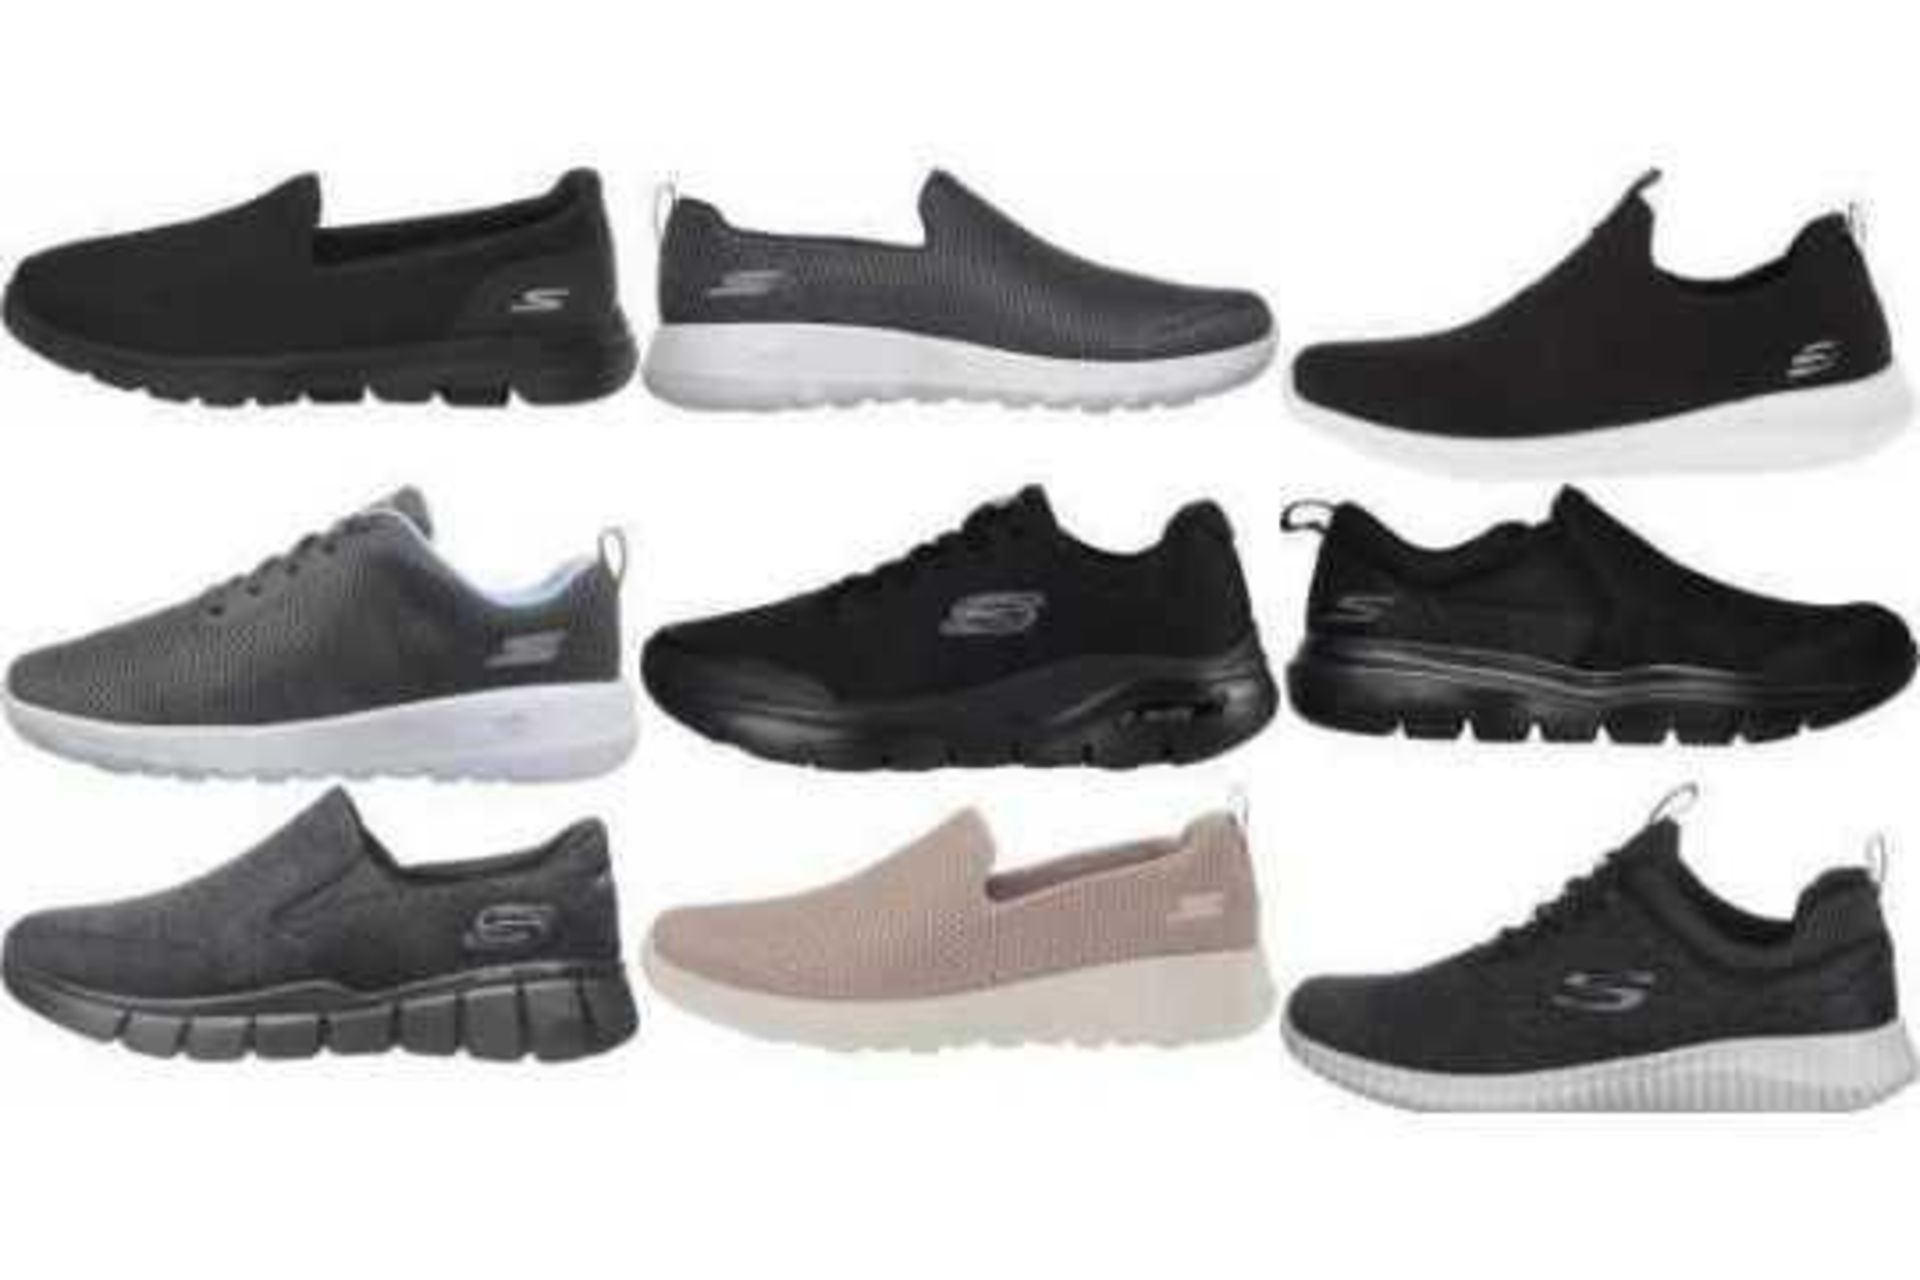 RRP £200 Lot To Contain 4 Boxed Pairs Of Skechers Designer Assorted Footwear In A Range Of Designs C - Image 2 of 2